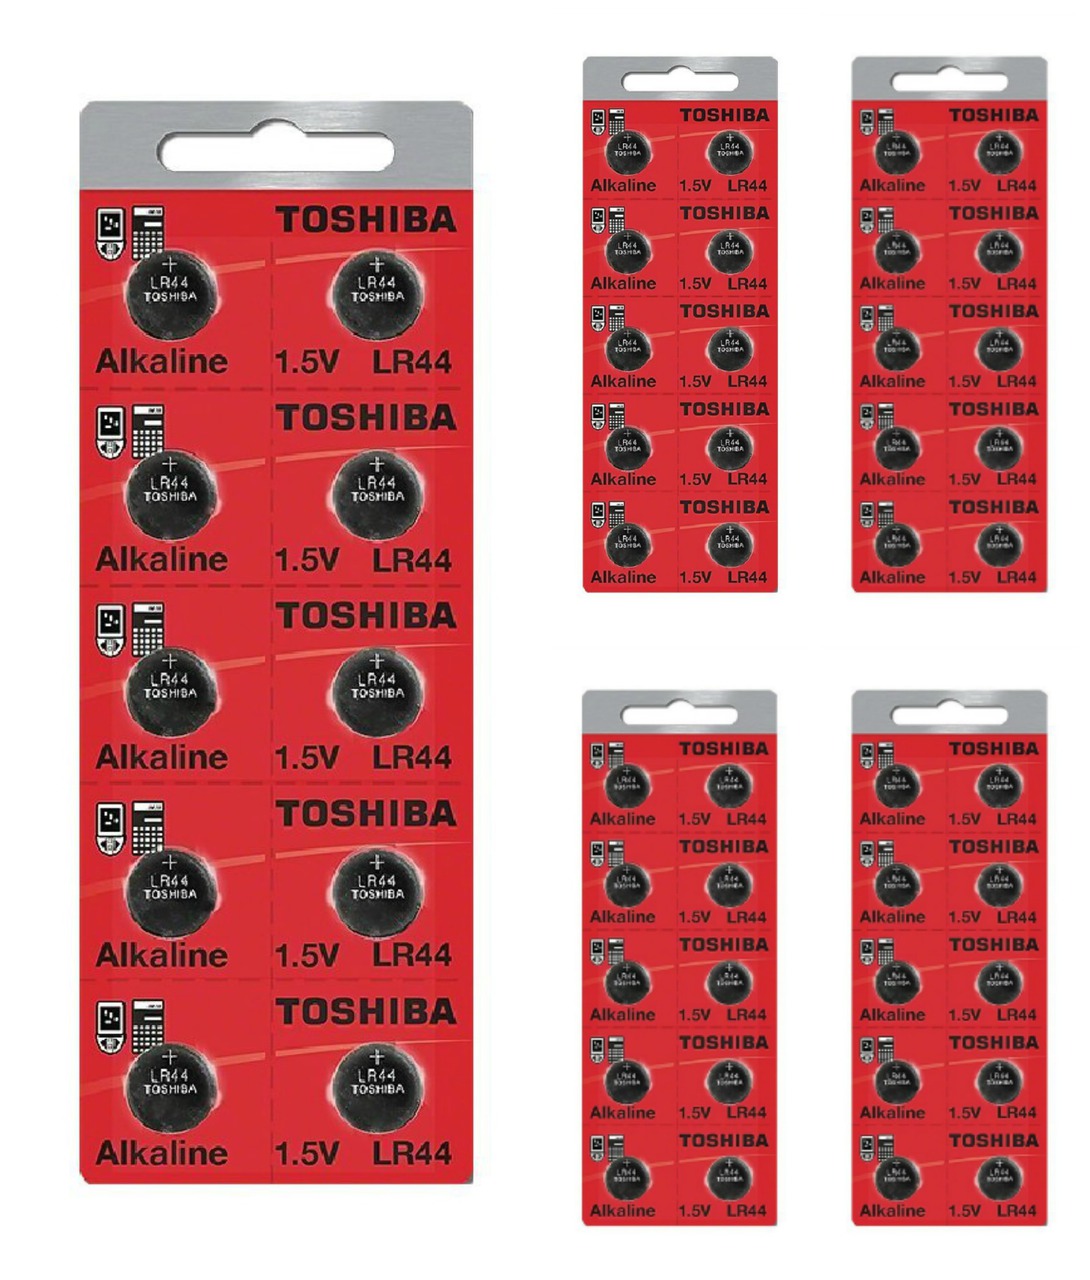 Toshiba LR44 - A76 Alkaline Button Battery 1.5V - 50 Pack + FREE SHIPPING!